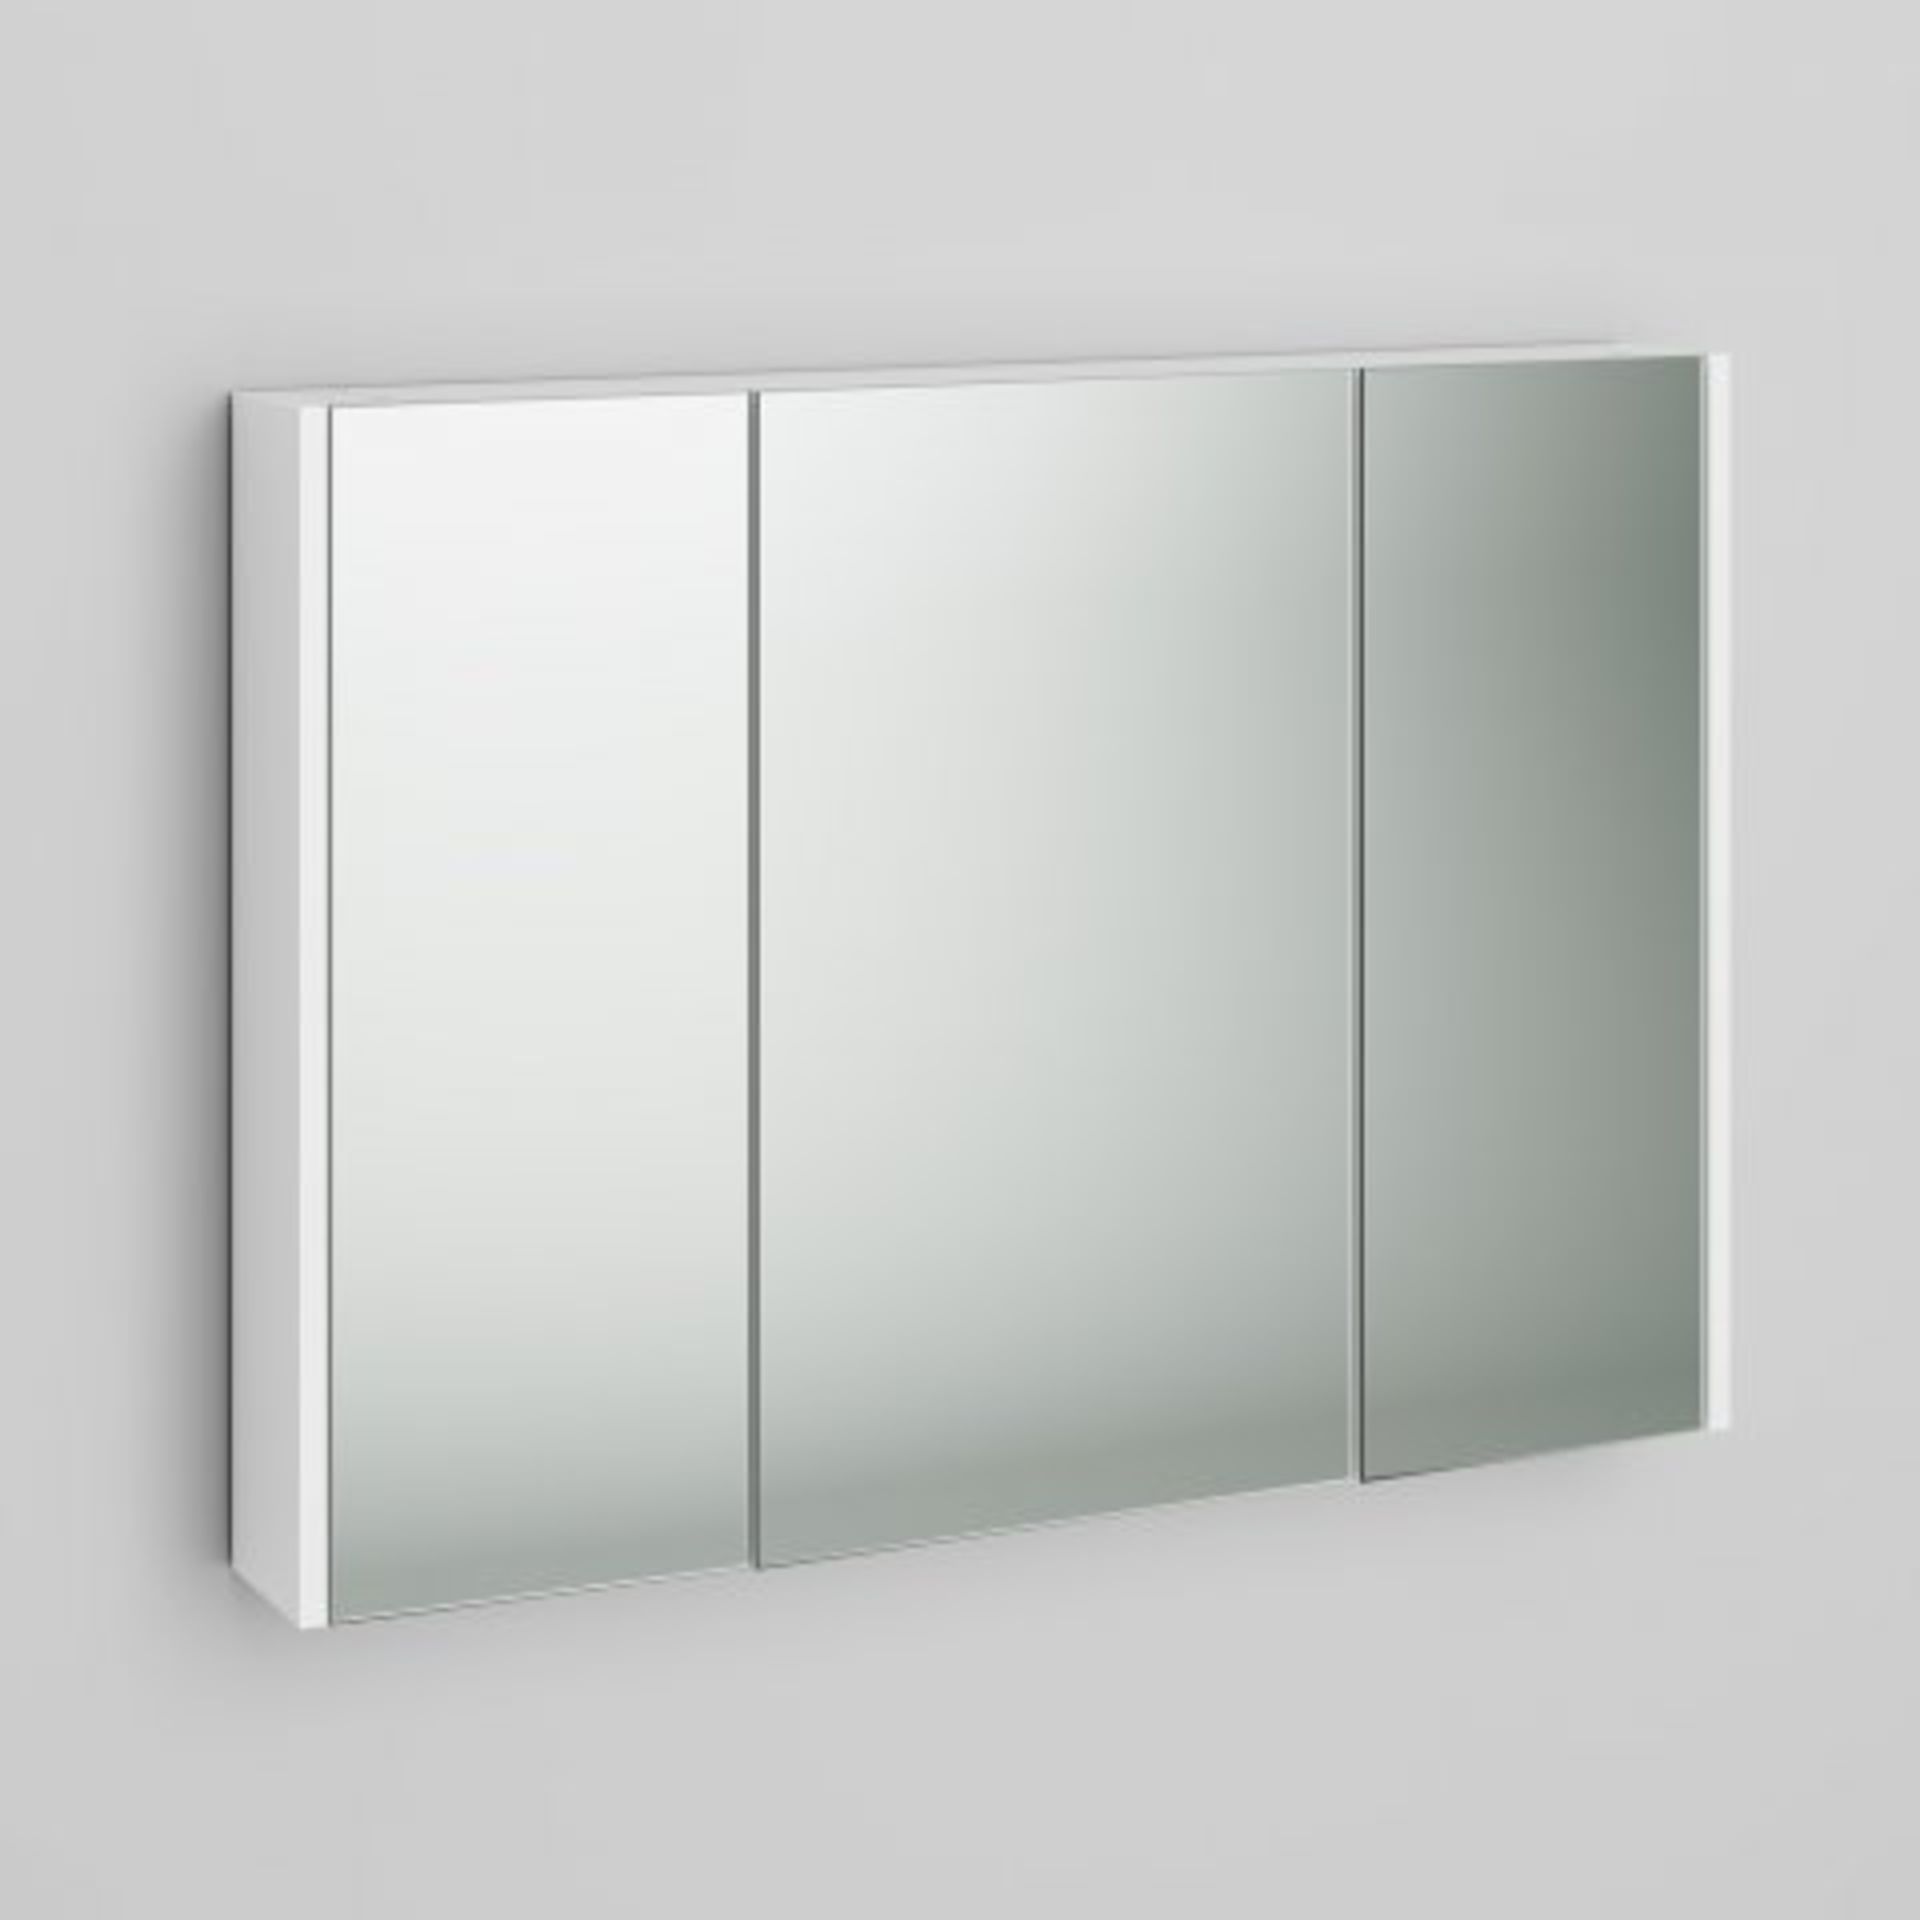 (J39) 900mm Gloss White Triple Door Mirror Cabinet. RRP £299.99. Reflection Perfection The - Image 3 of 5